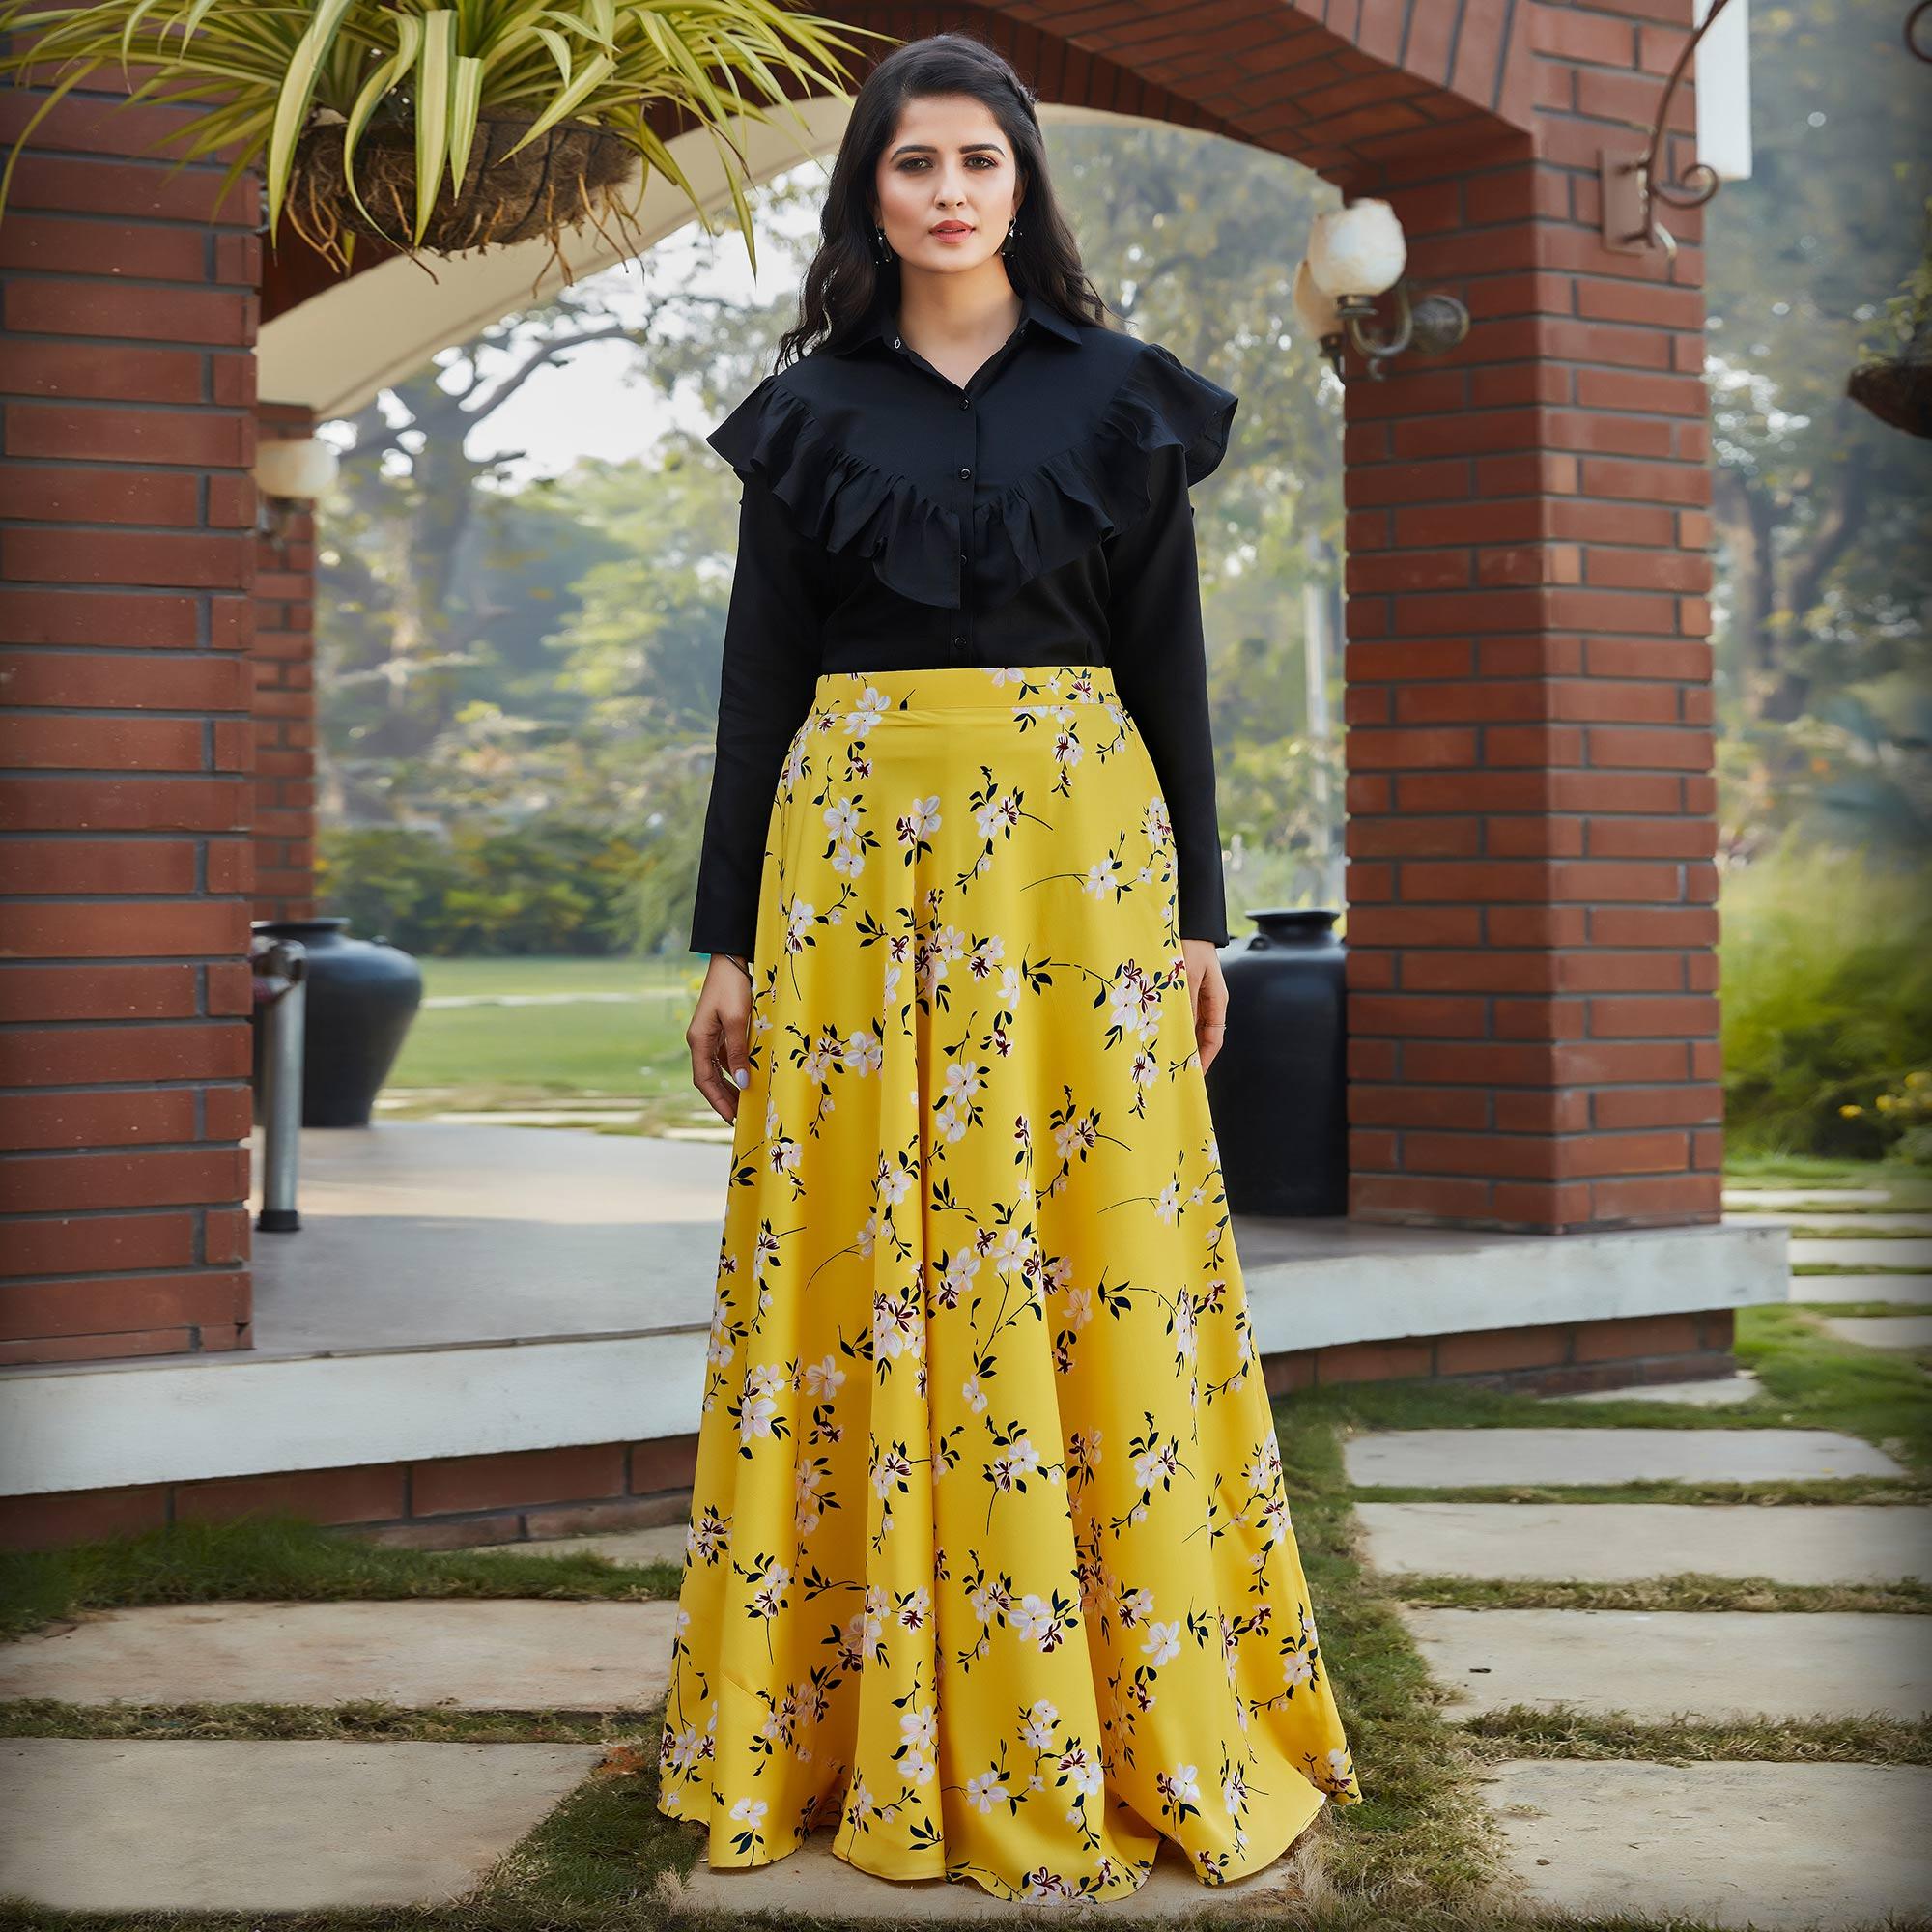 Intricate Black - Yellow Colored Casual Printed Western Crop Top Skirt